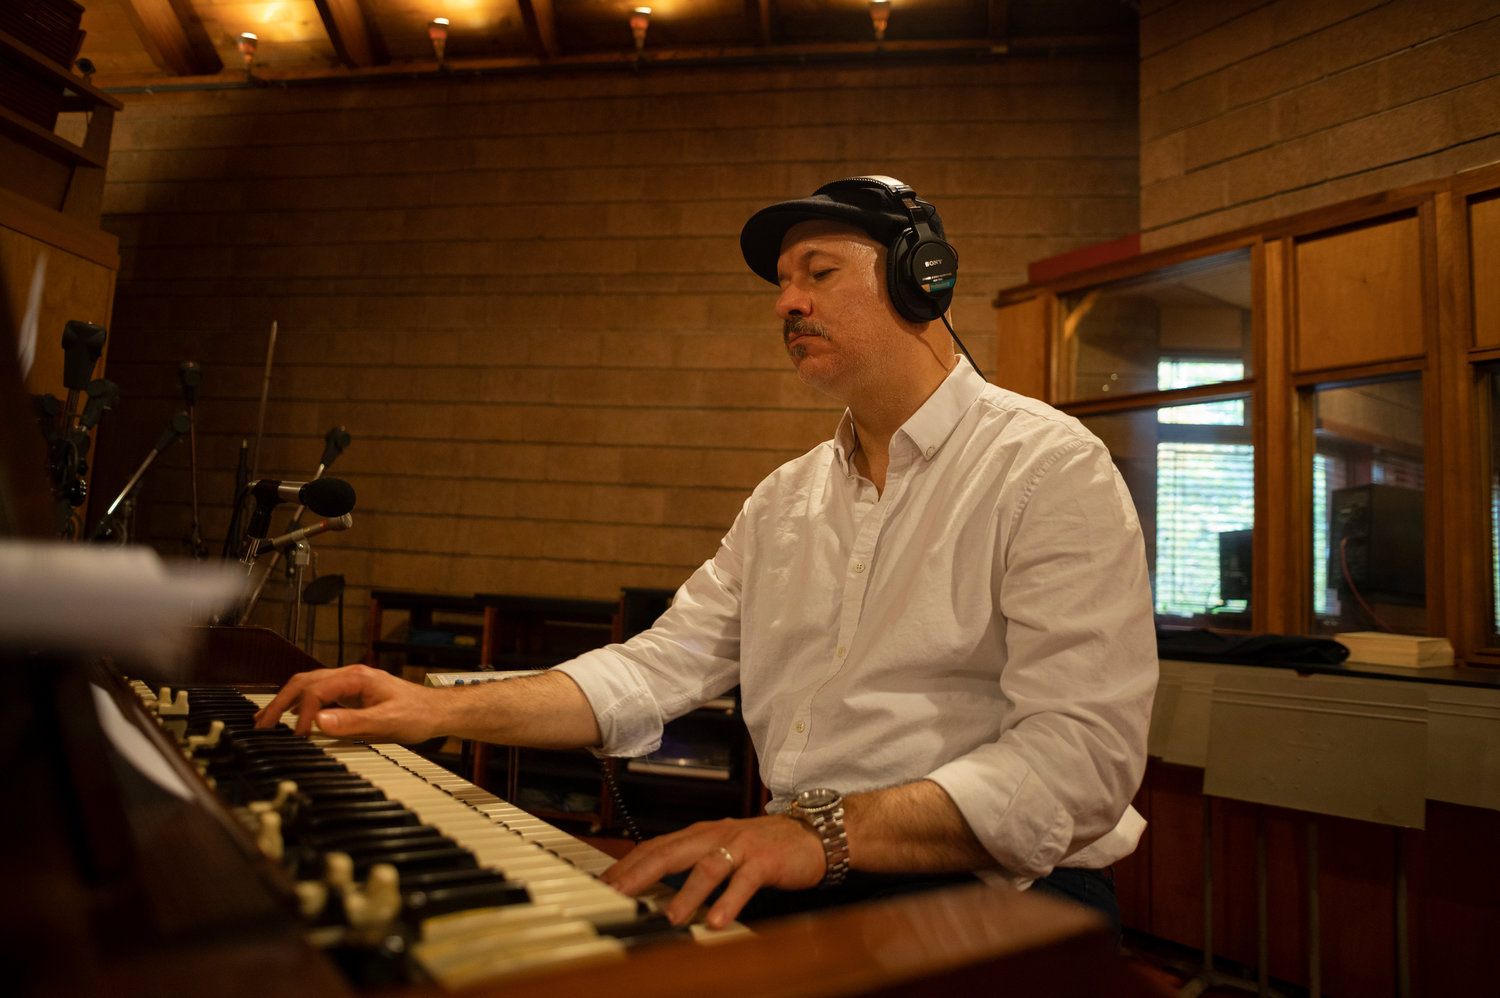 Organist Brian Charette cut his latest CD, “Jackpot,” at the New Jersey Studio where John Coltrane’s “A Love Supreme” and many other jazz classics were recorded.